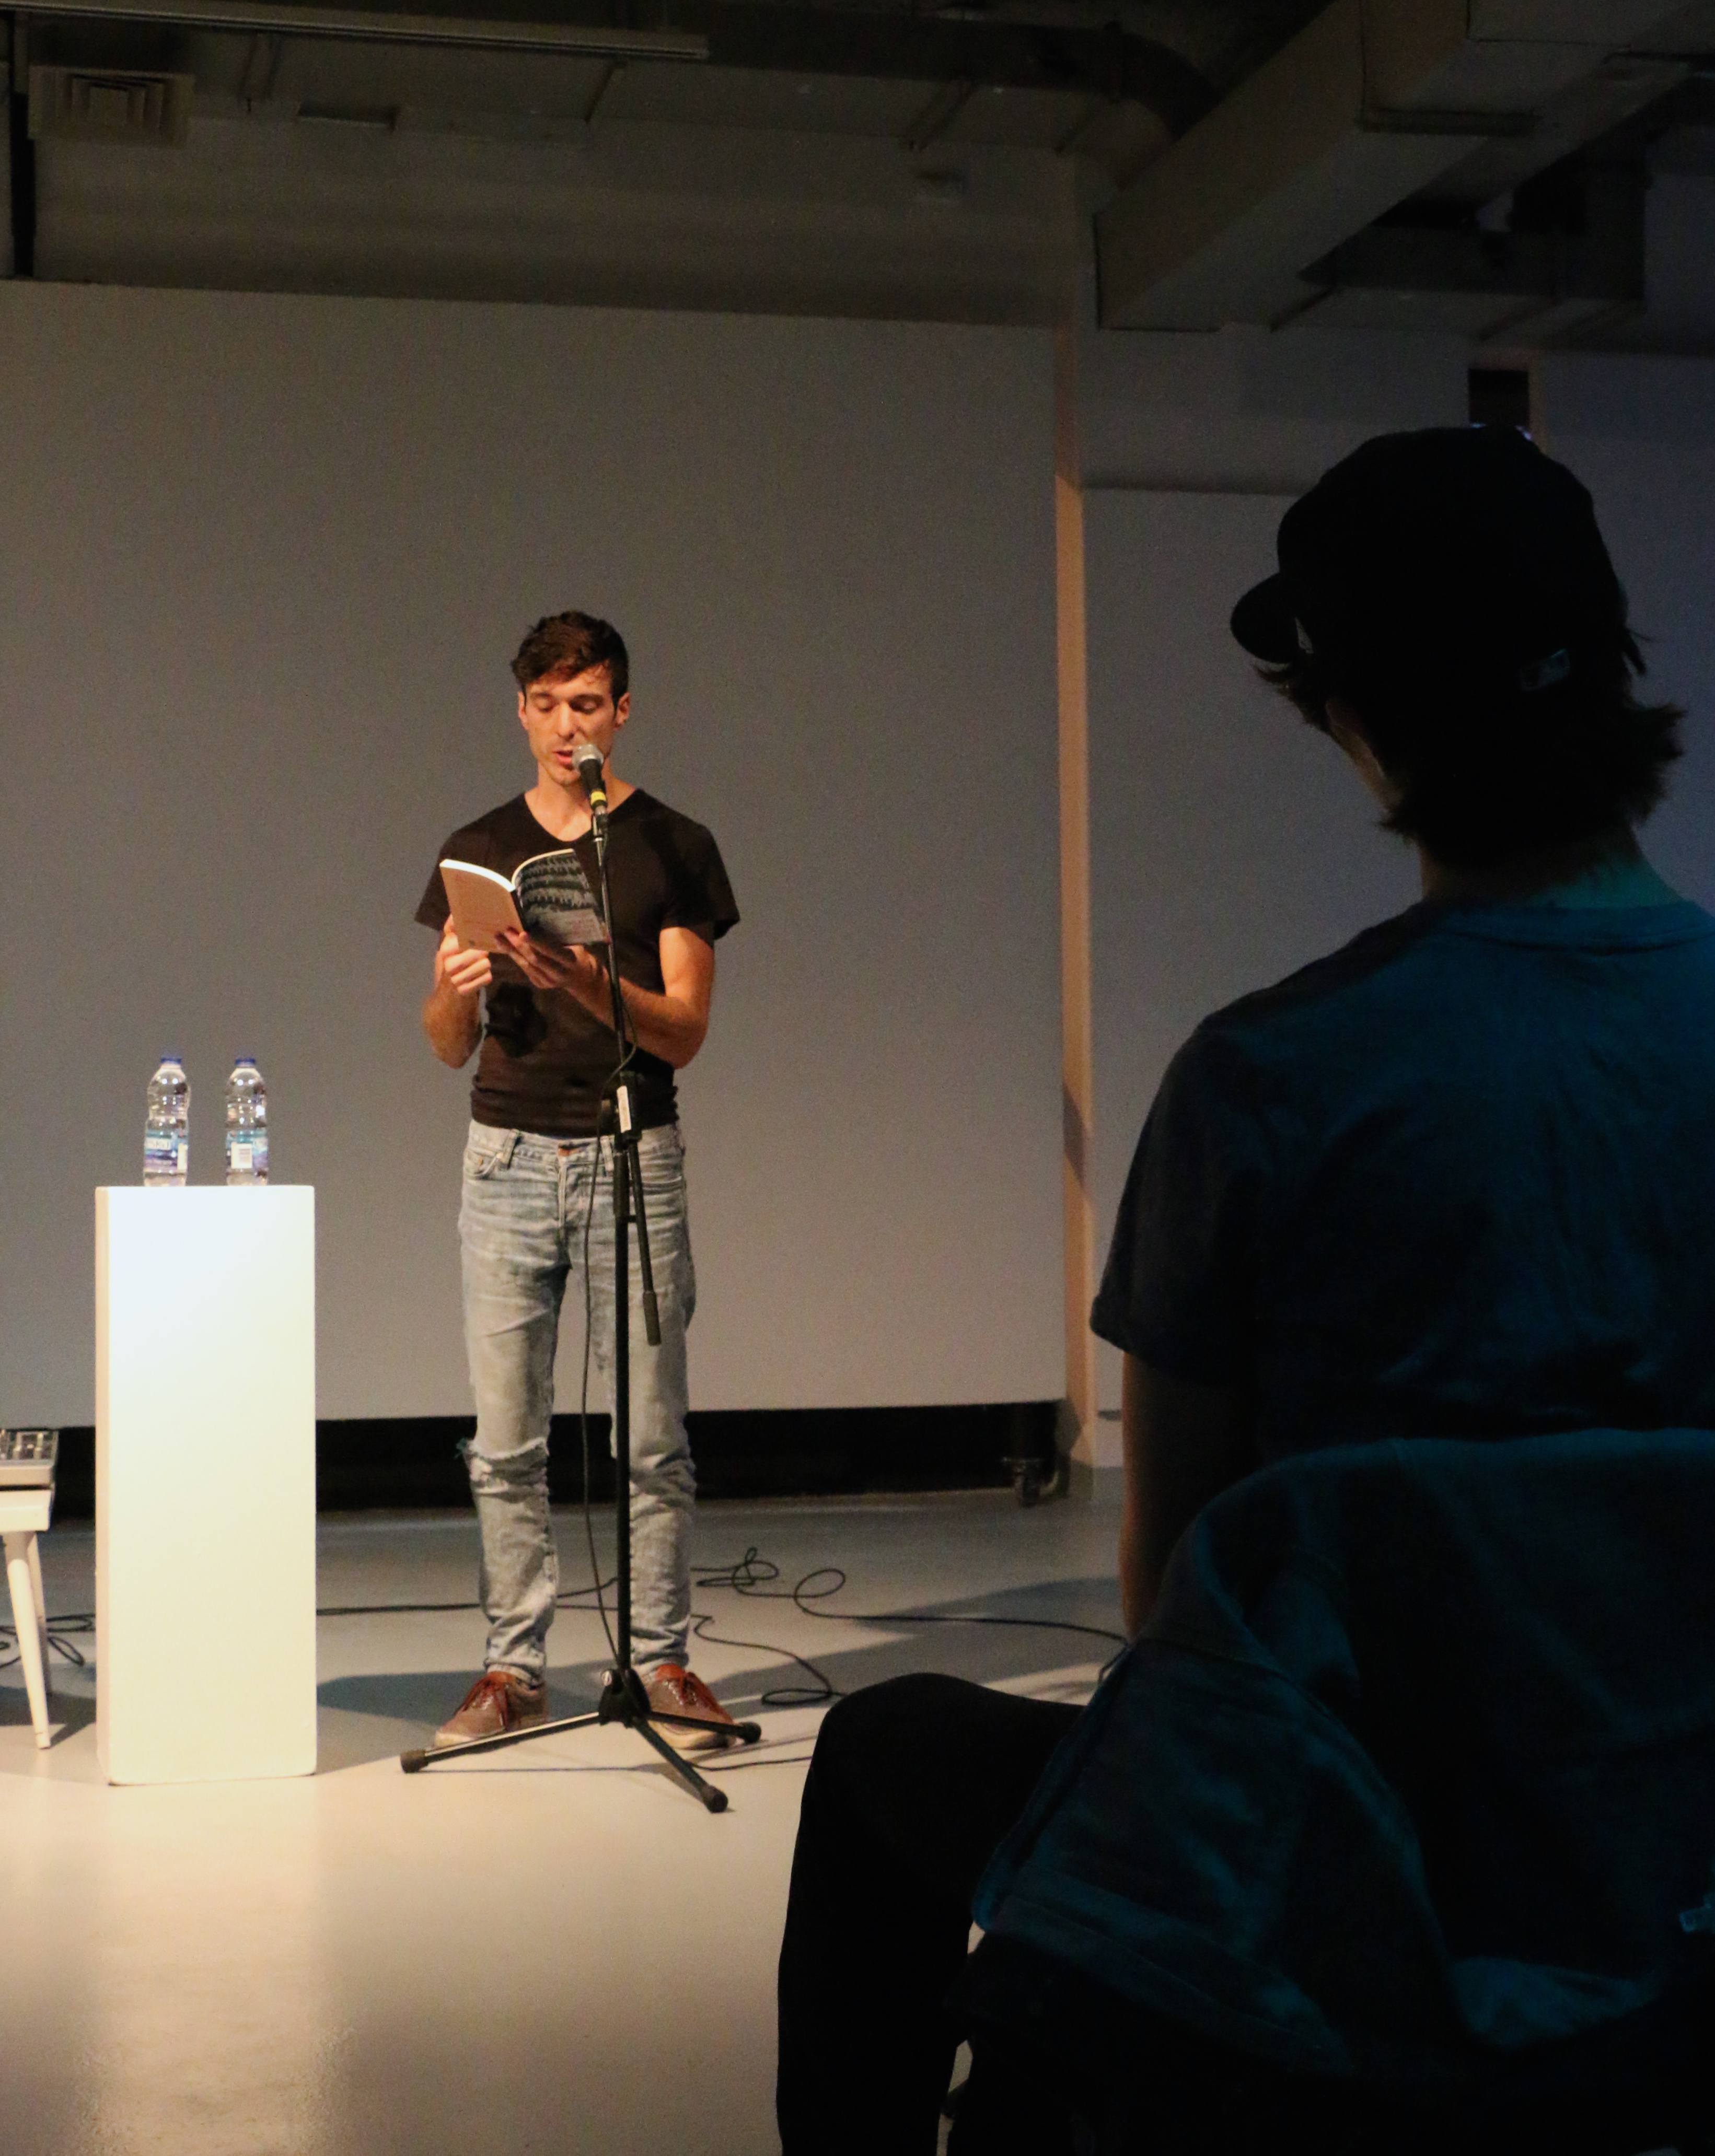 Jordan Tannahill read from Theatre of the Unimpressed on Sept. 22. Photo by Lydia Anderson.